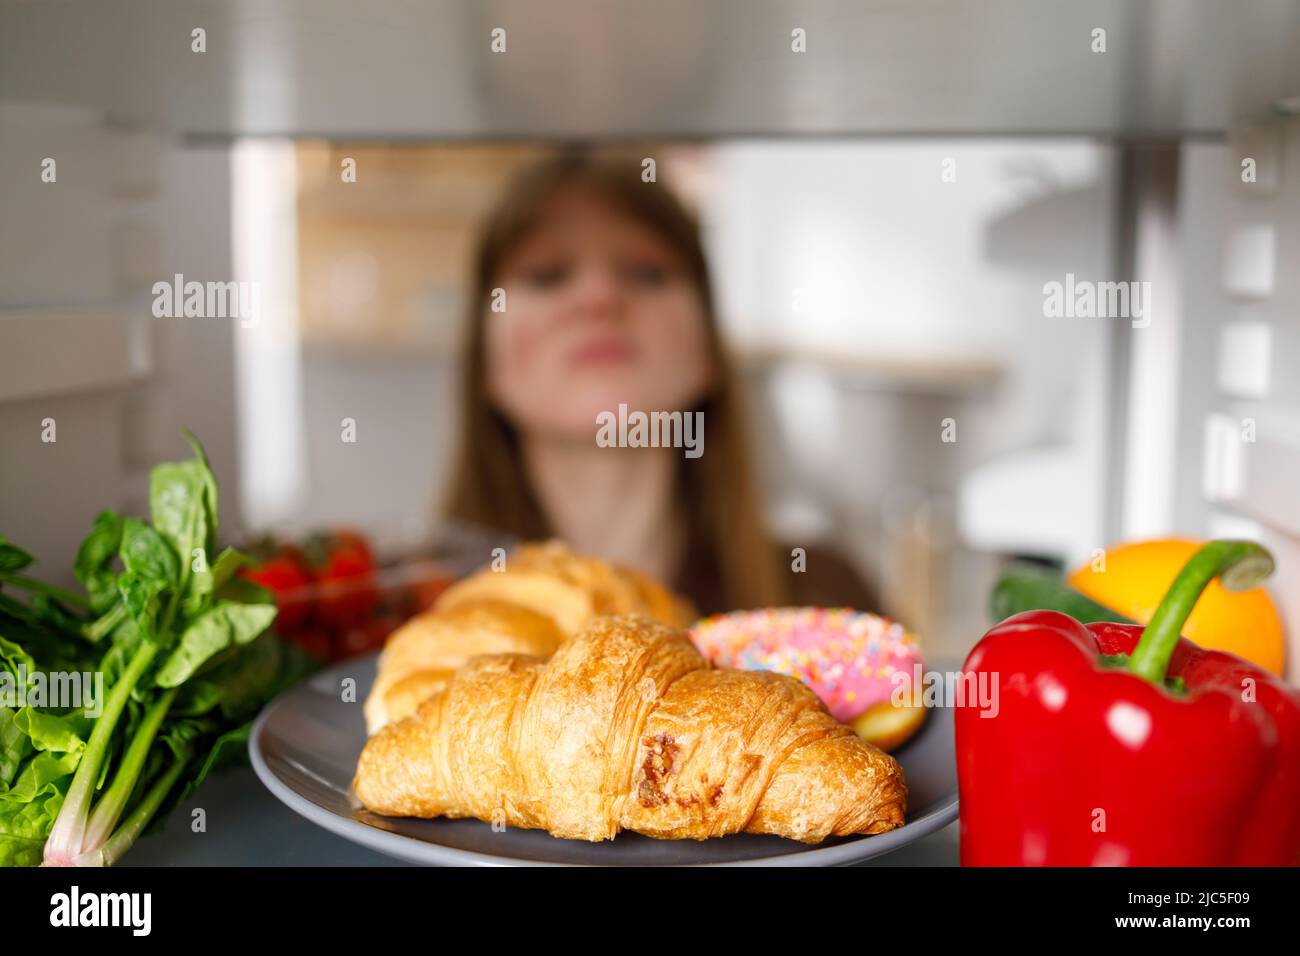 Selective focus of woman looking into fridge at the kitchen. Sweets and vegetables on the refrigerator shelf Stock Photo